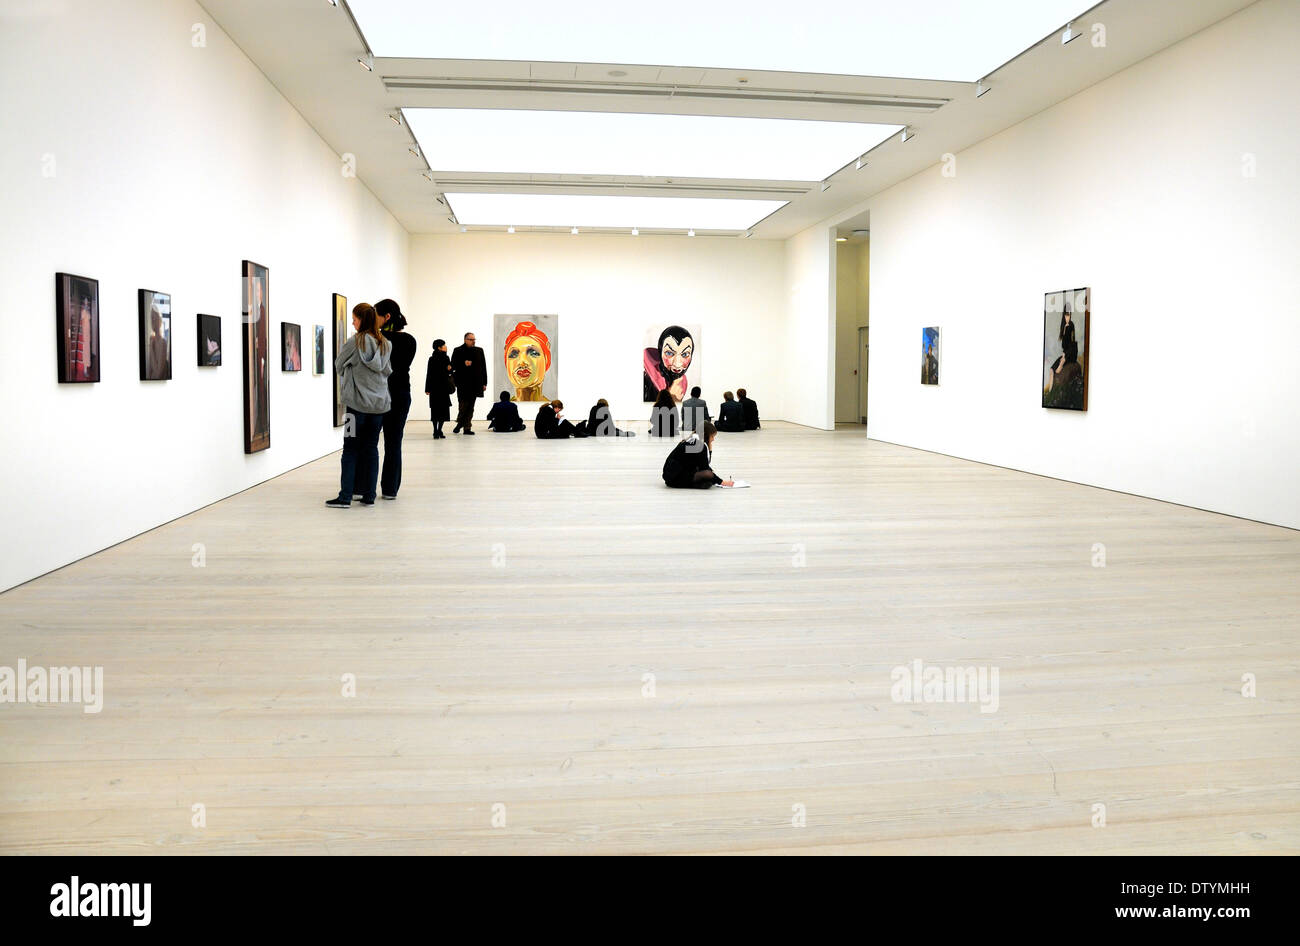 London, England, UK. Saatchi Gallery in the Duke of York's HQ building, King's Road. Stock Photo